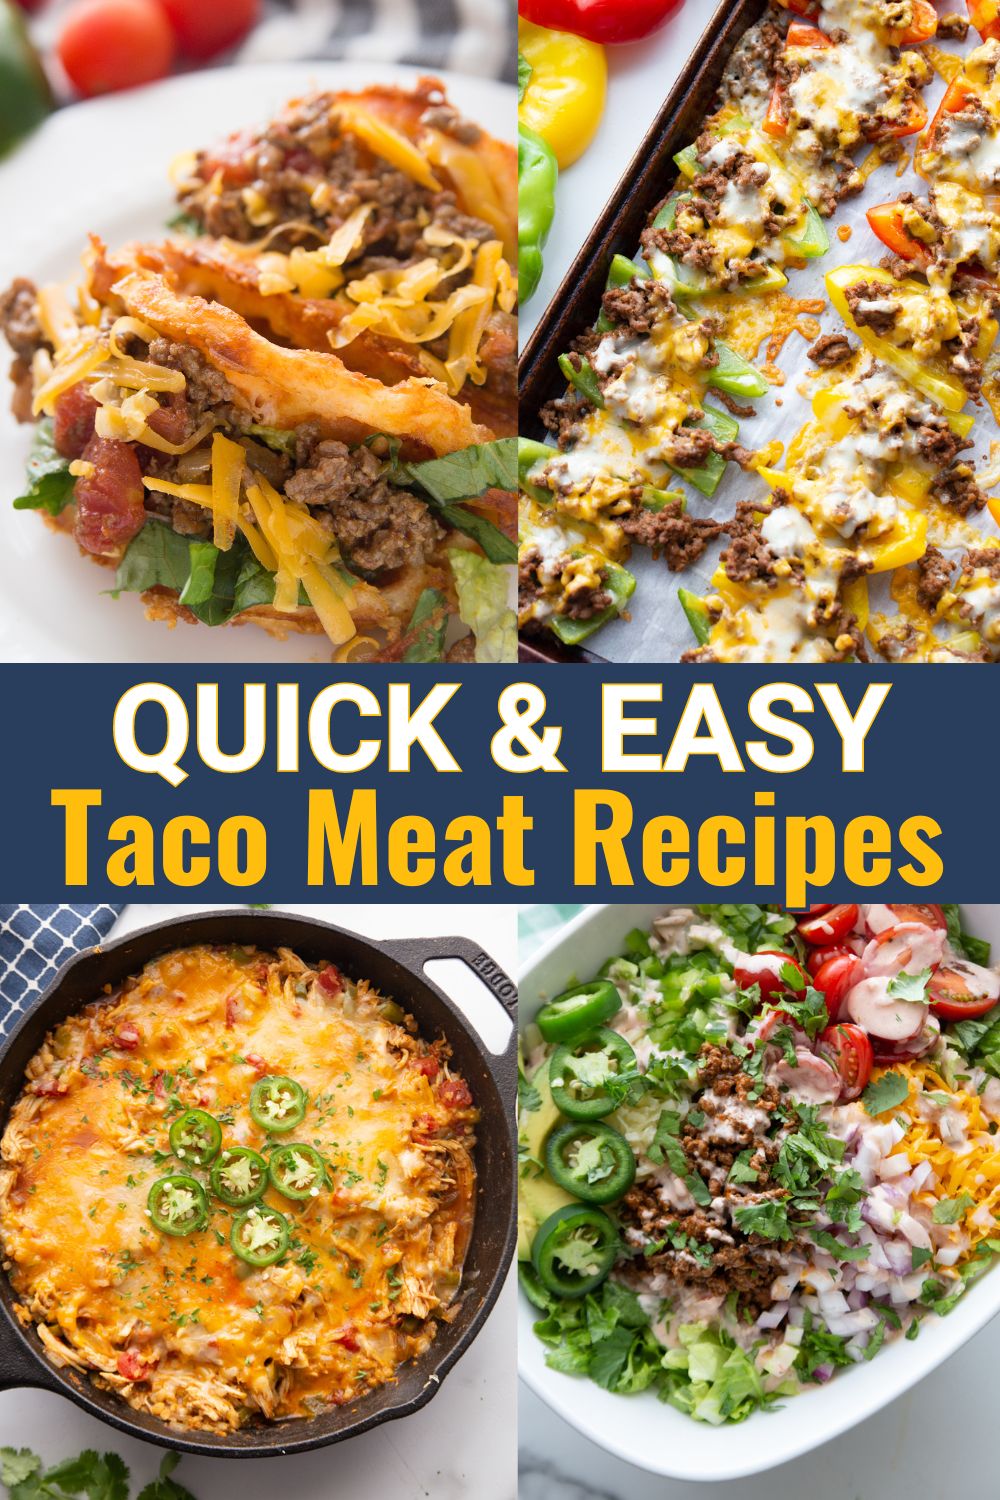 Collage of 4 images for recipes using leftover taco meat including taco chaffle, keto nachos, Mexican skillet, and taco salad, with "Leftover Taco Meat Recipes" text graphic spanning horizontally center of the collage.